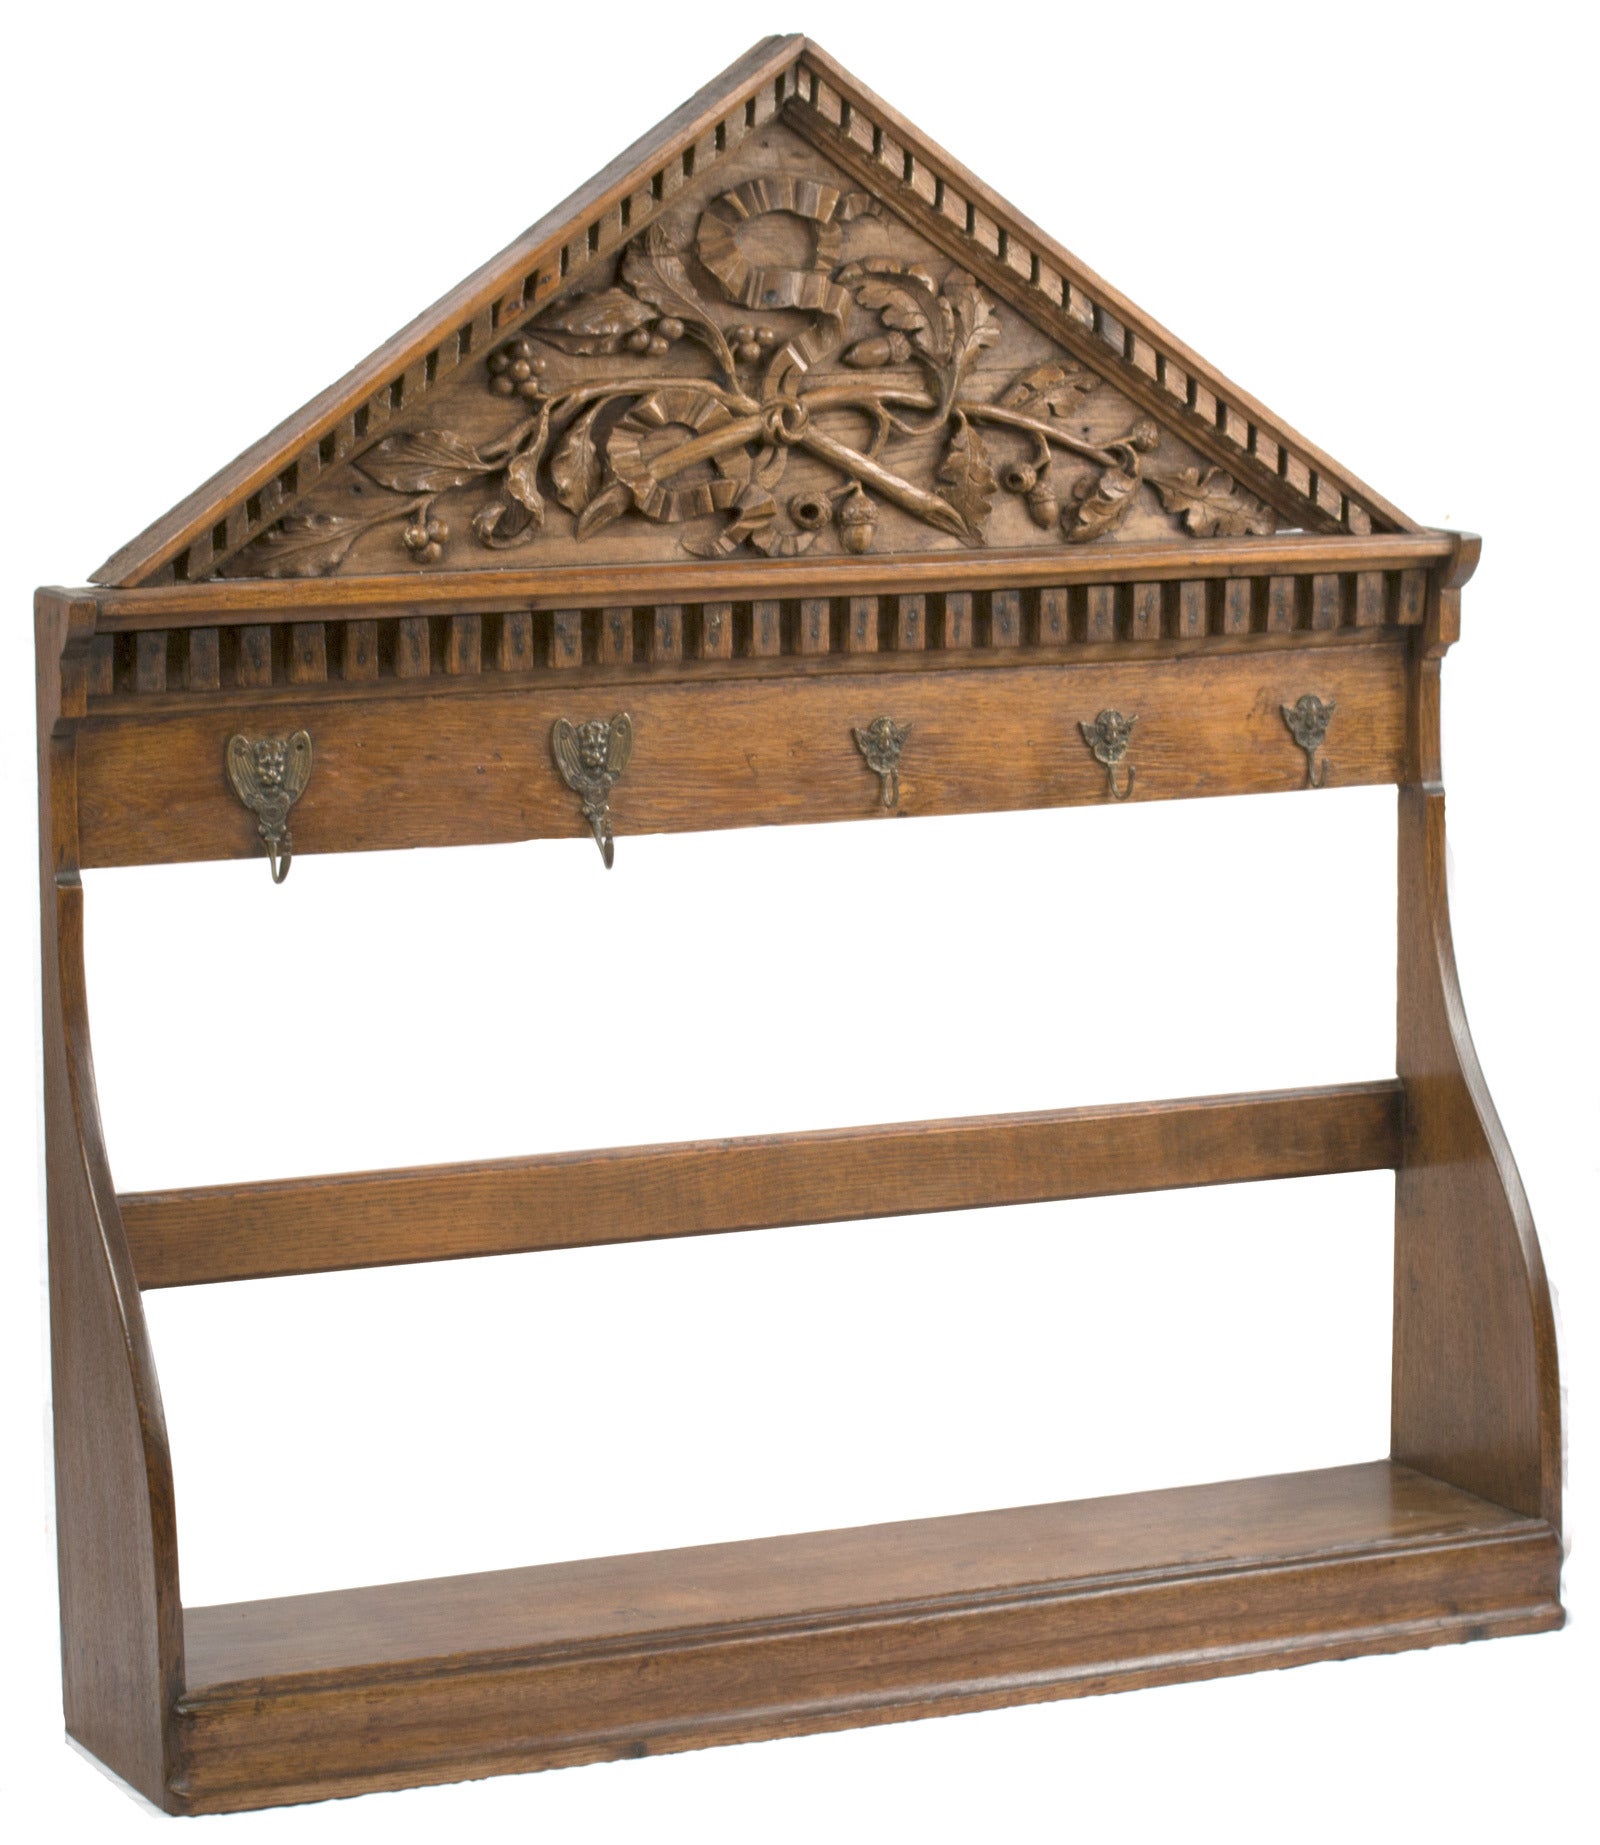 A French Carved Walnut Pot Rack with Oak and Mulberries